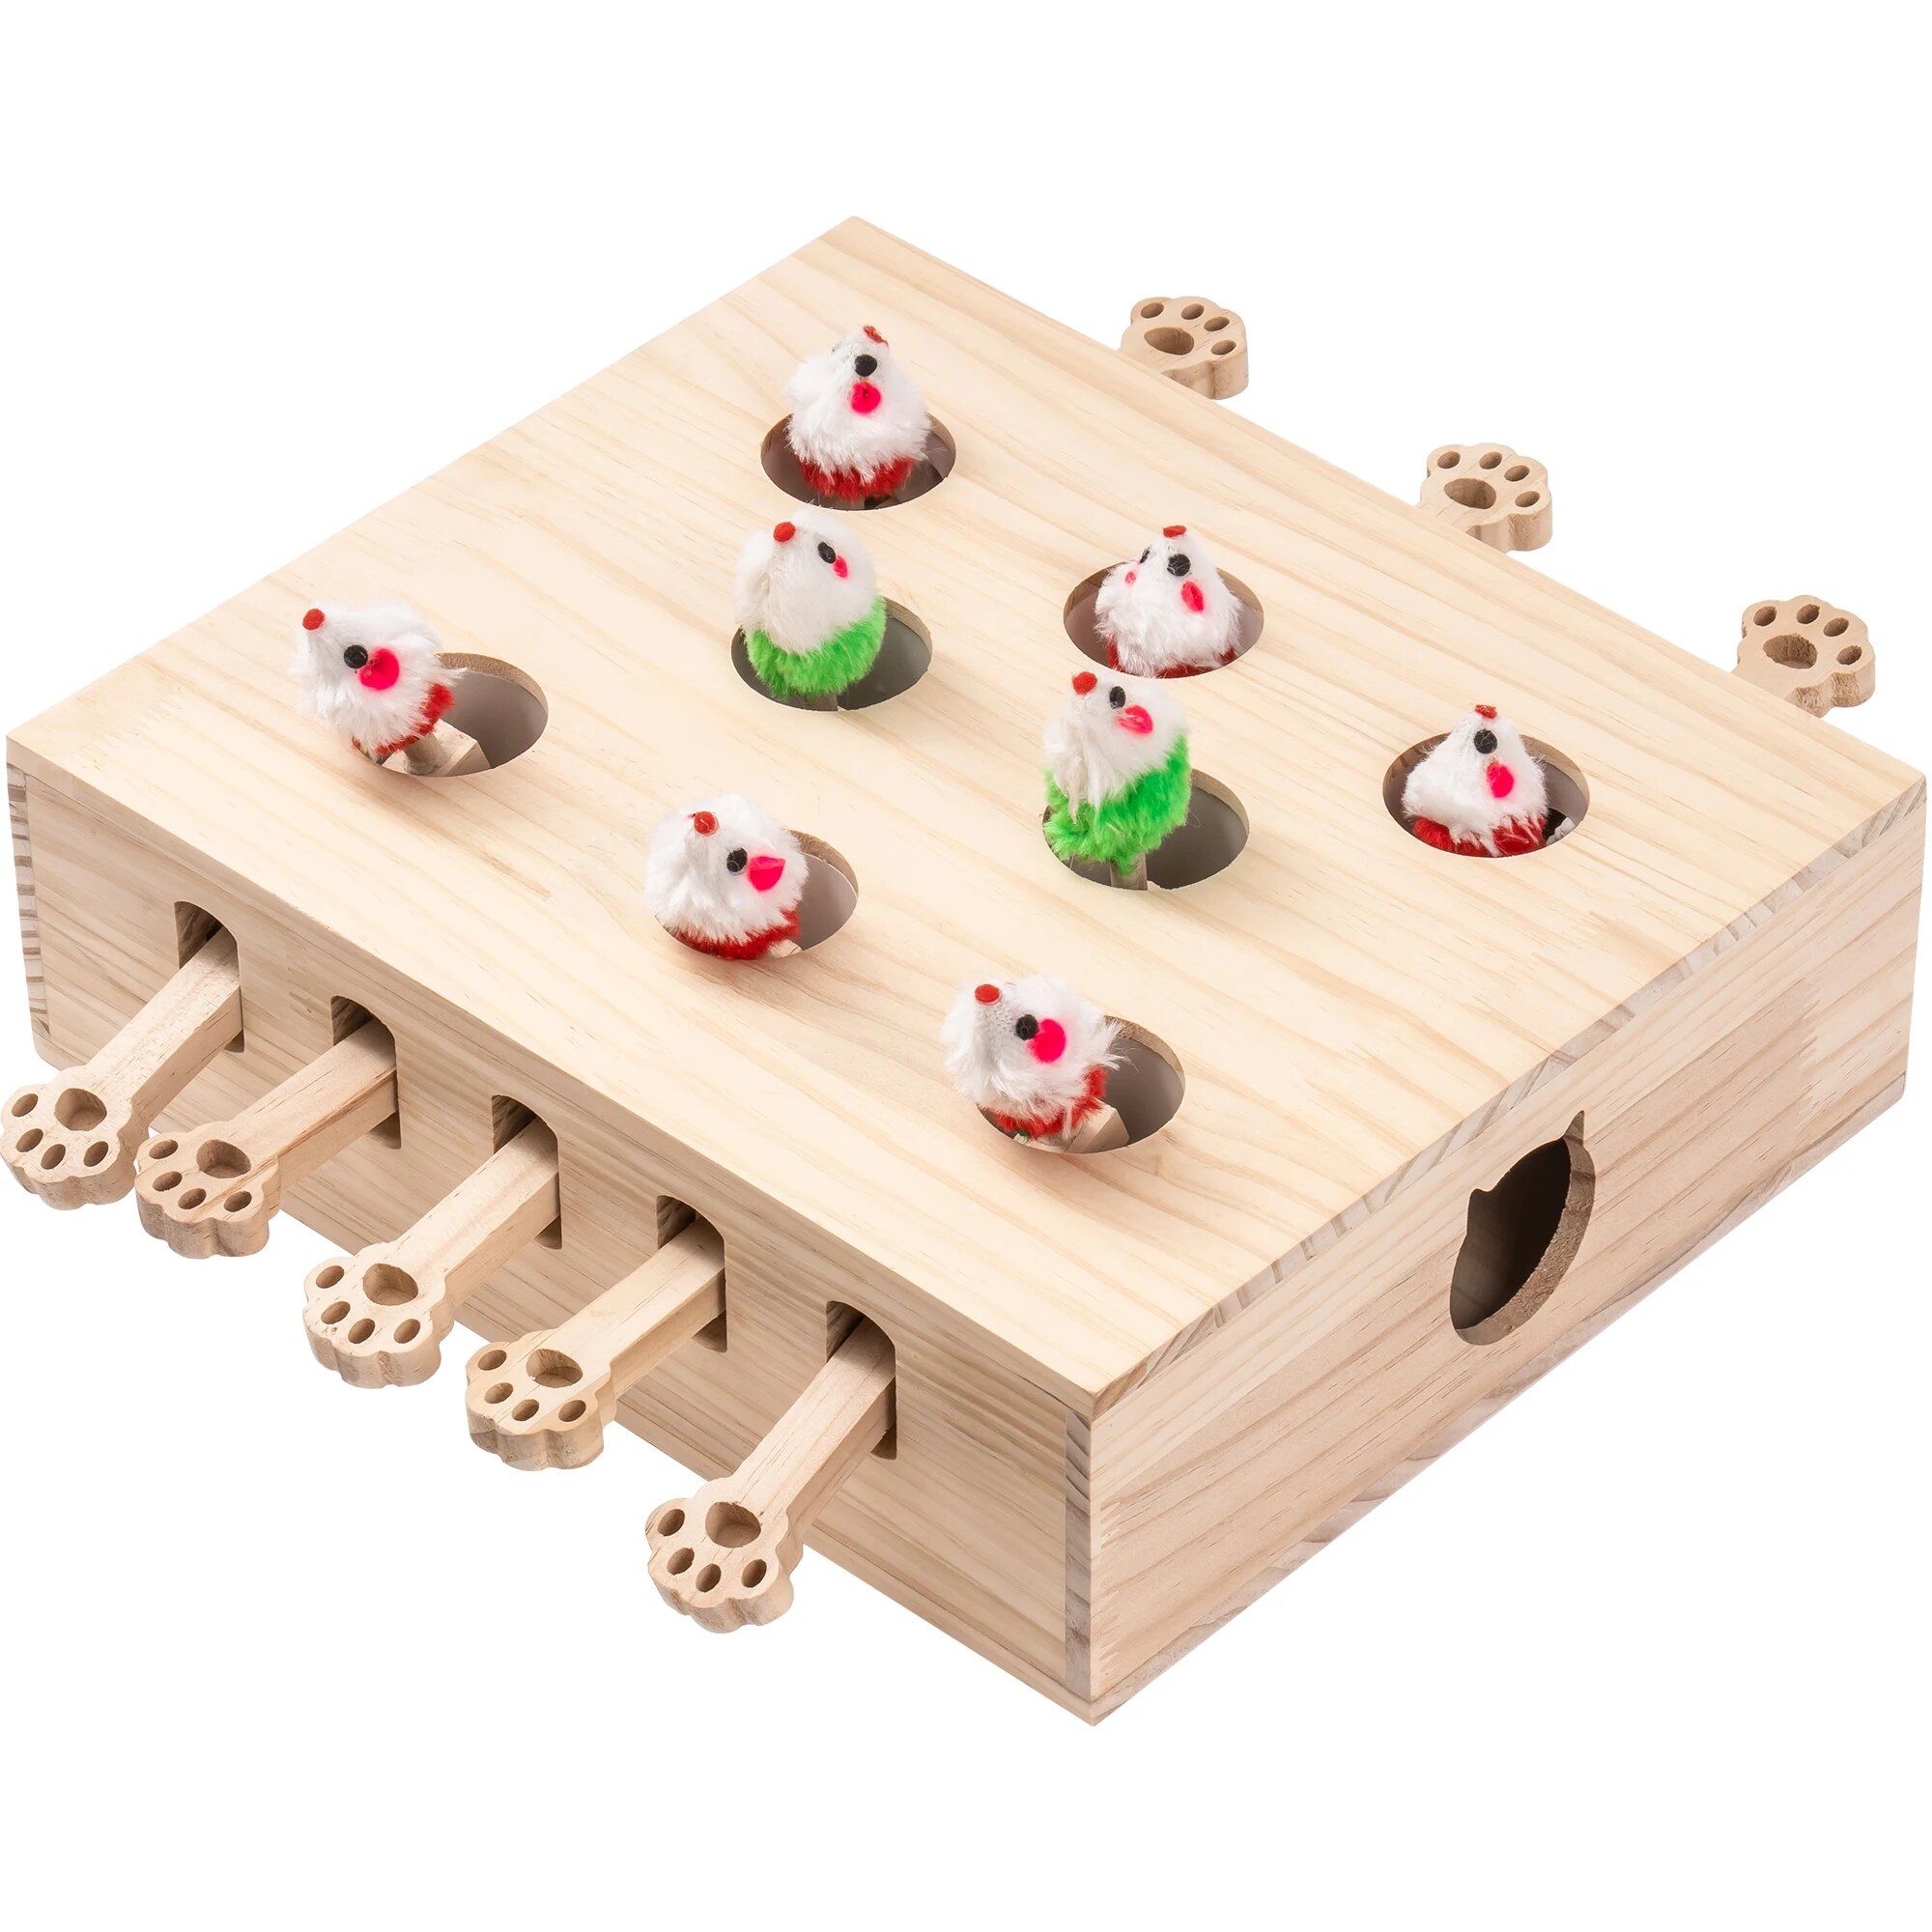 Interactive Solid Wood Whack-a-Mole Cat Toy with Natural Wood Finish 